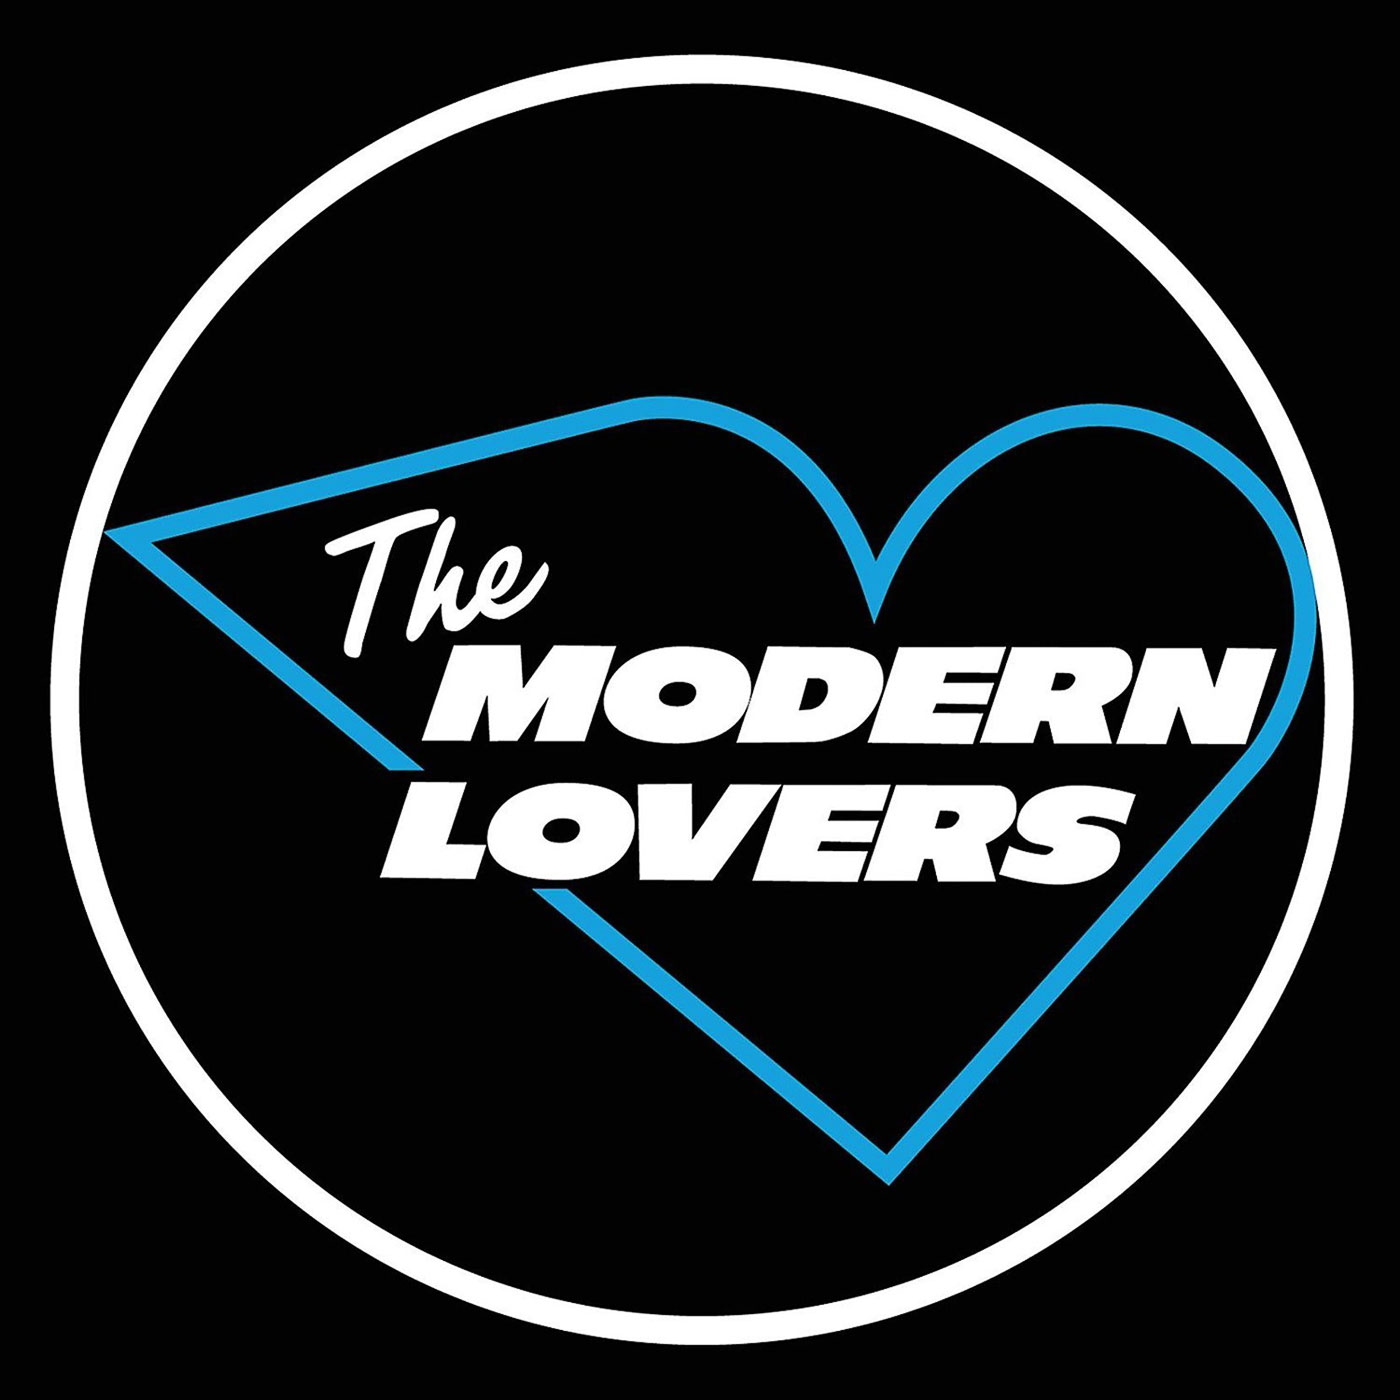 350 The Modern Lovers – The Modern Lovers